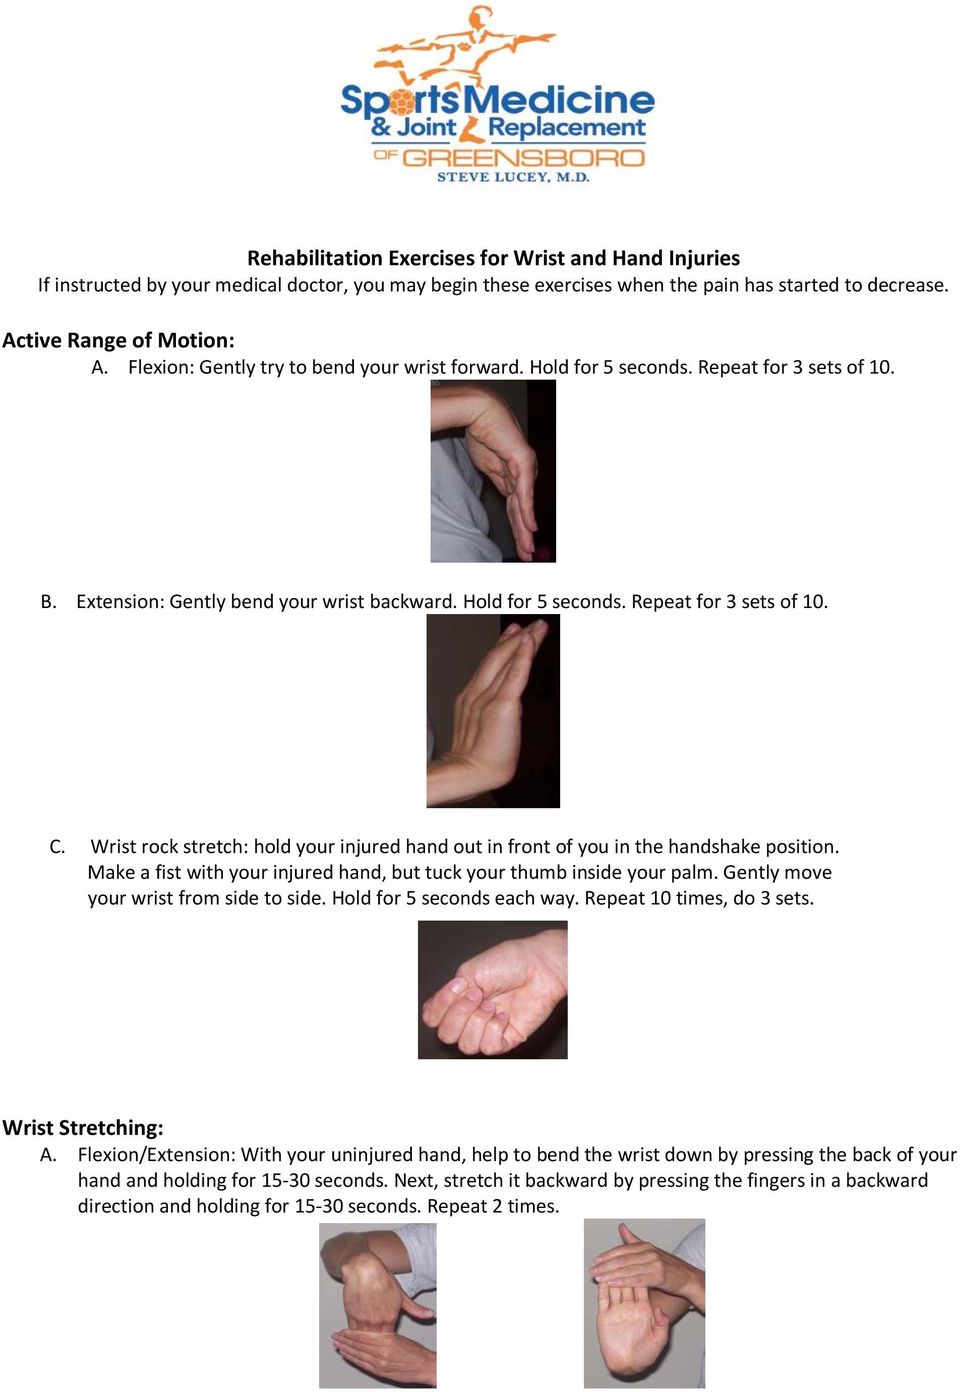 Wrist rock stretch: hold your injured hand out in front of you in the handshake position. Make a fist with your injured hand, but tuck your thumb inside your palm.